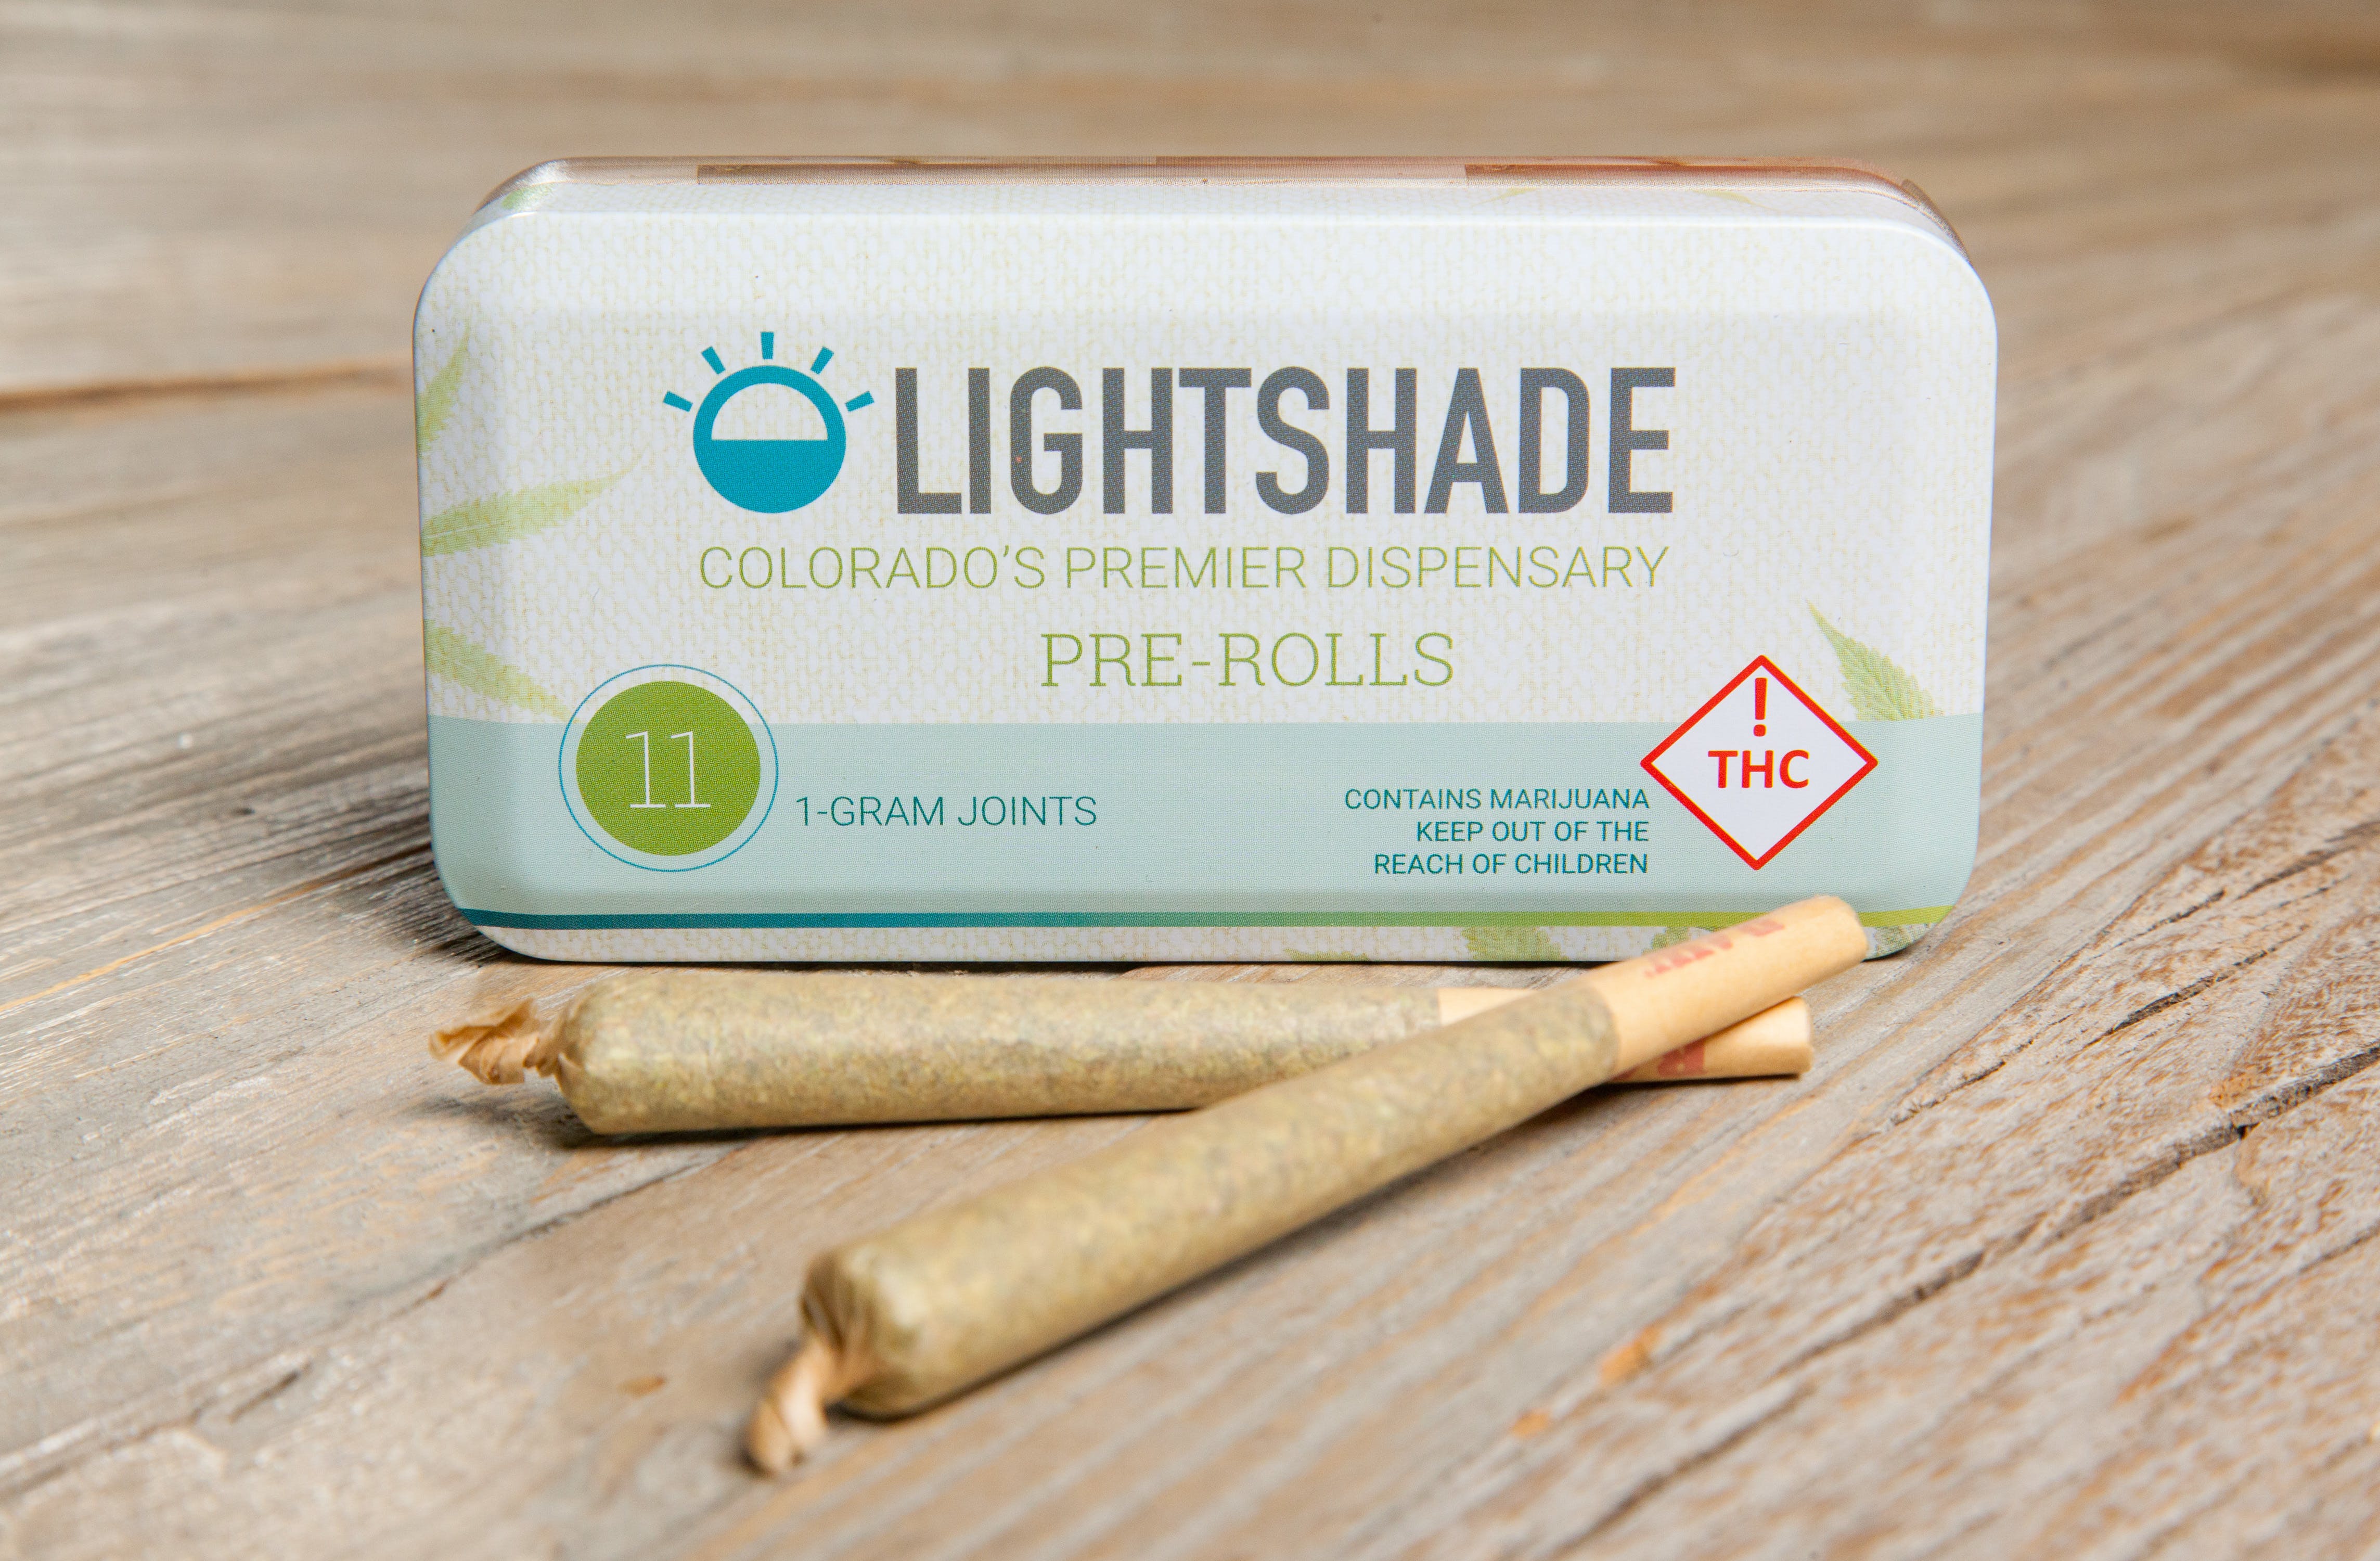 marijuana-dispensaries-lightshade-federal-heights-in-federal-heights-death-star-mile-high-joint-pack